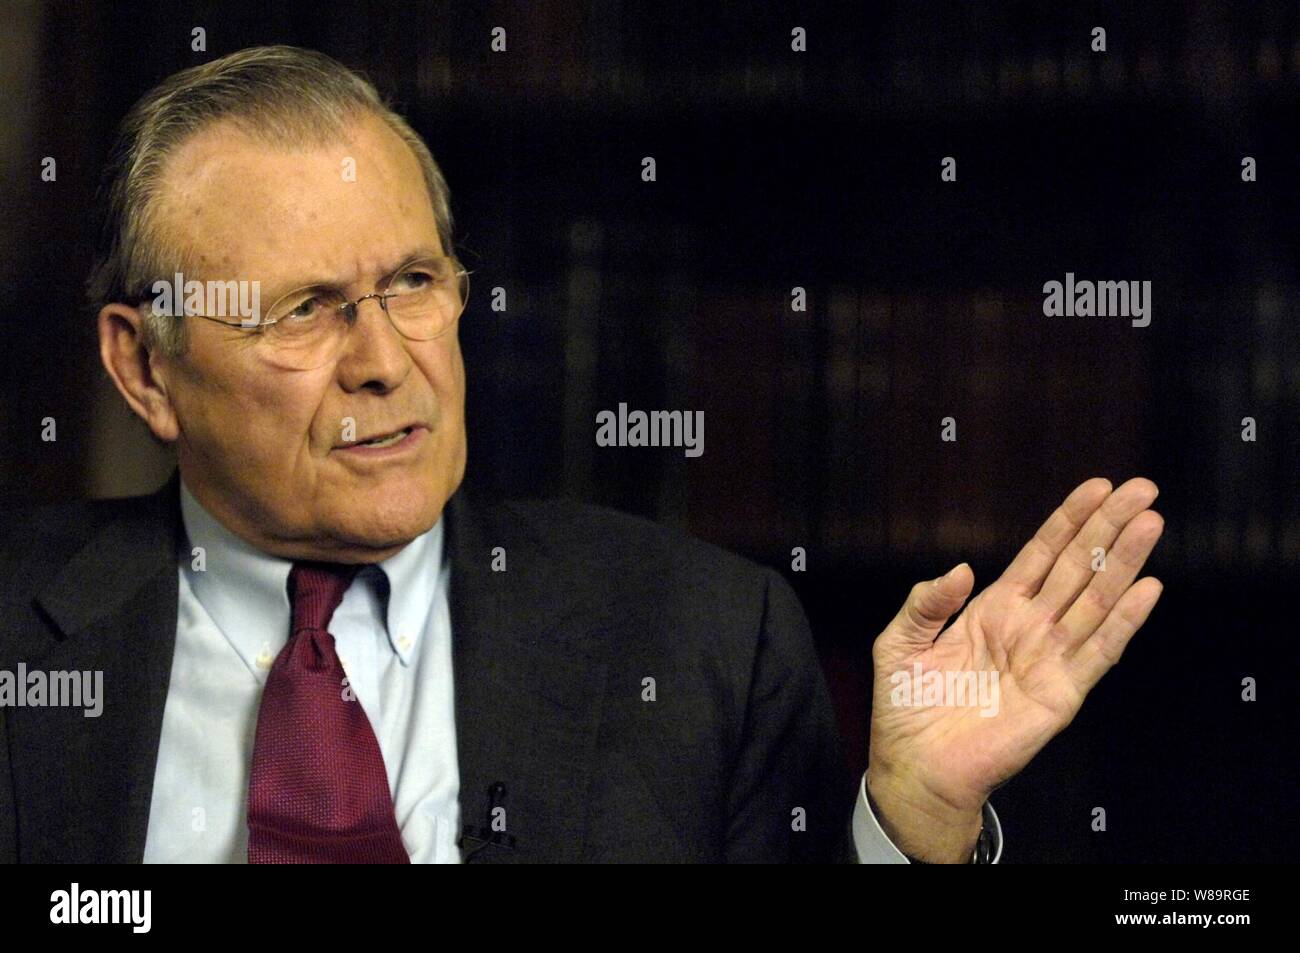 Secretary of Defense Donald H. Rumsfeld responds to a reporter's question during a television interview in Munich, Germany, on Feb. 3, 2006.  Rumsfeld is in Munich to attend the 42nd Munich Conference on Security Policy.   Over 40 foreign and defense ministers from around the world are attending the three-day conference to discuss global security issues. Stock Photo